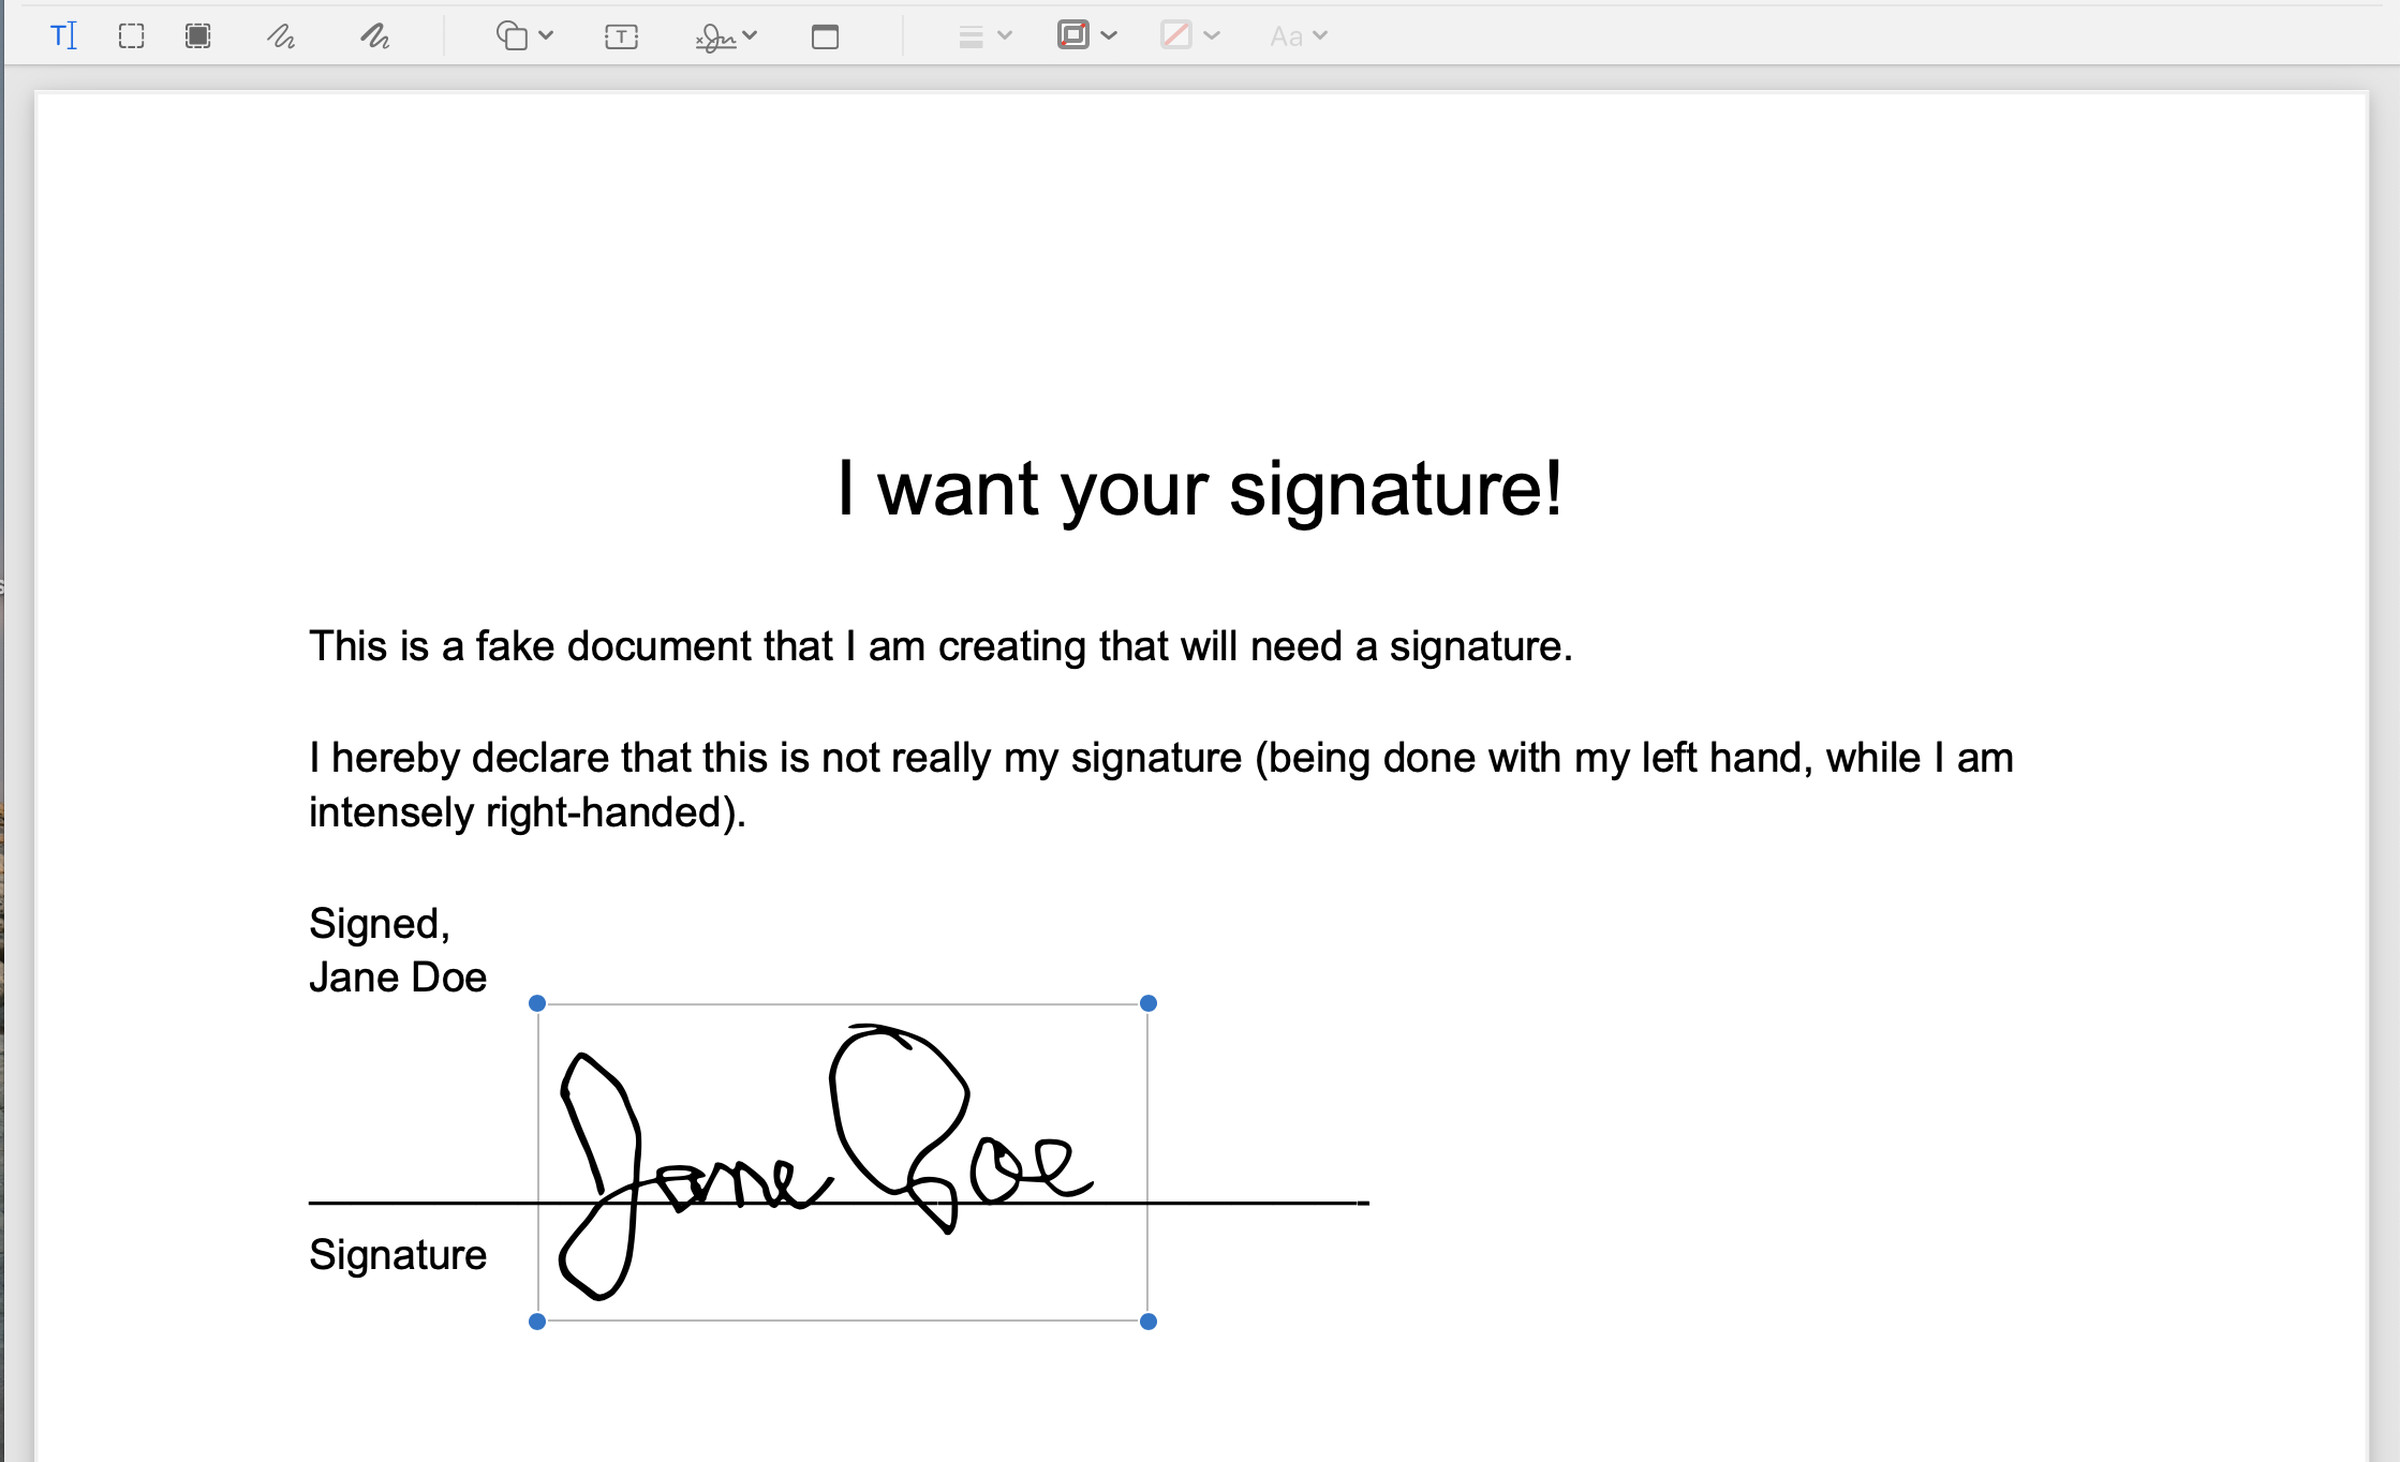 You can move the signature to where you want it and make it larger or smaller.